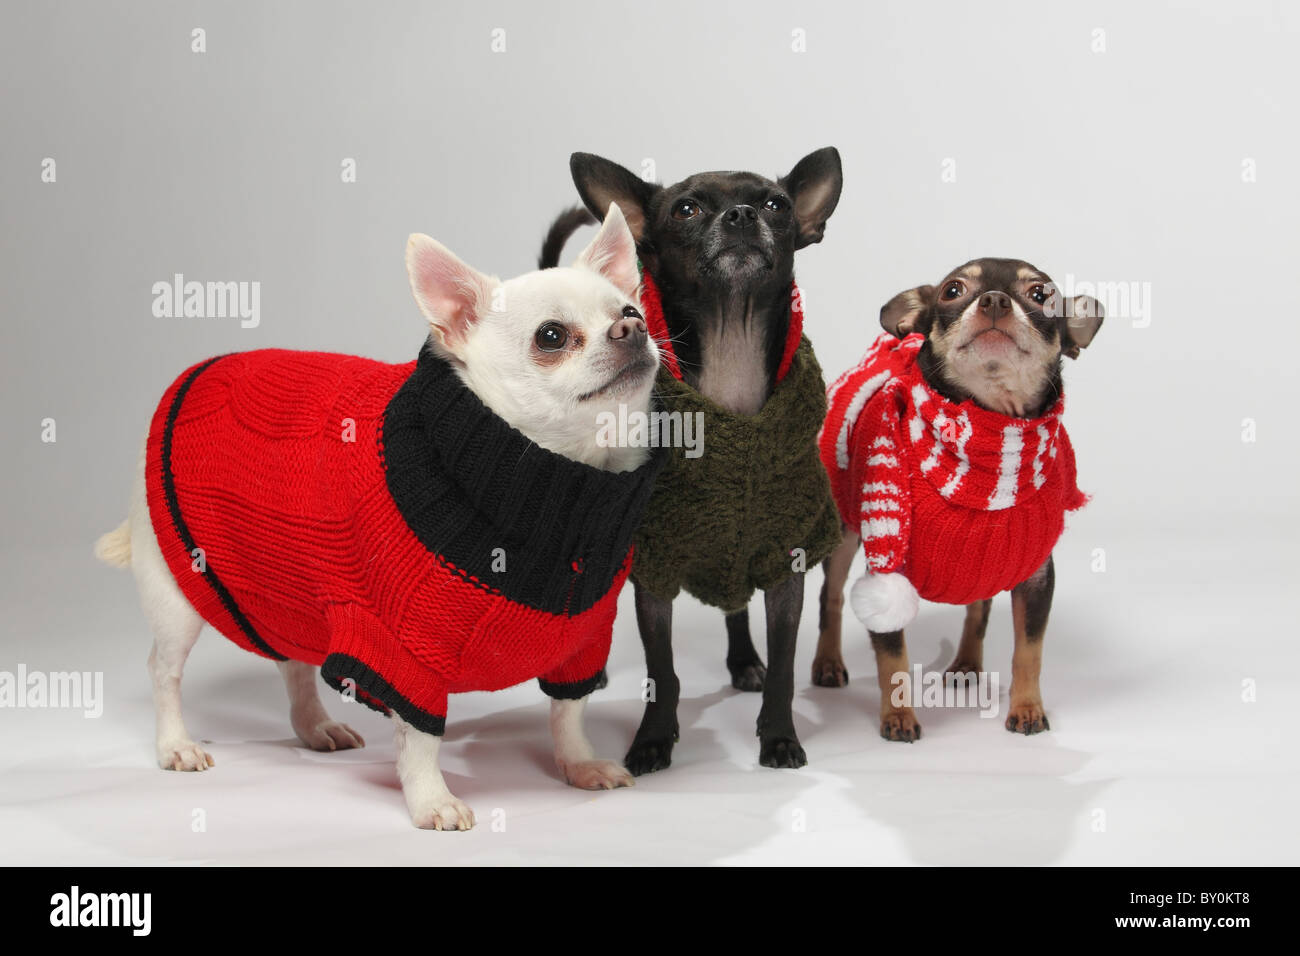 three adorable chihuahua pet dogs dressed in winter outfits Stock Photo